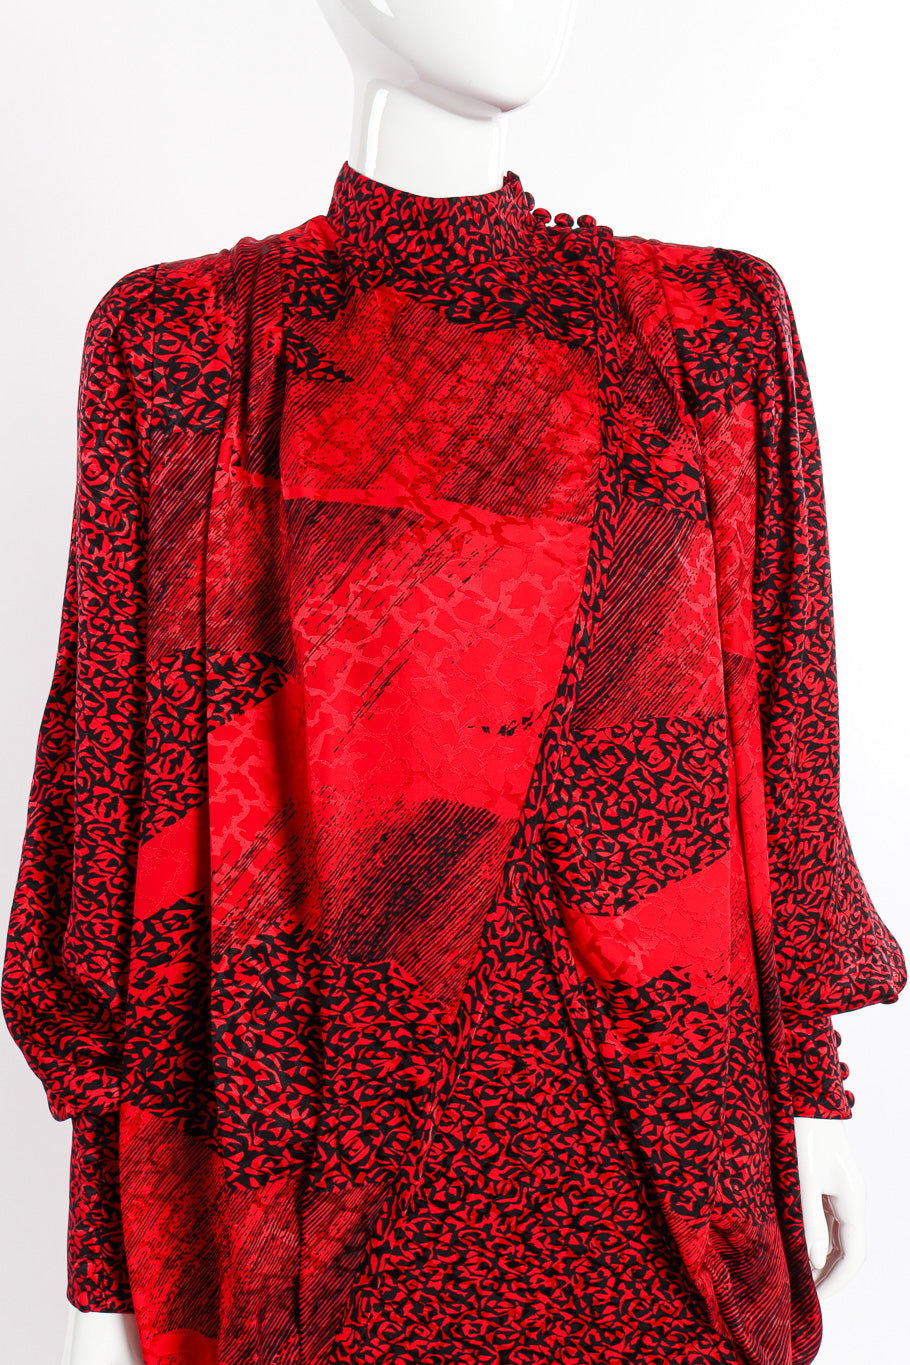 Abstract Wrap Front Jacket & Dress Set on mannequin chest close @recessla